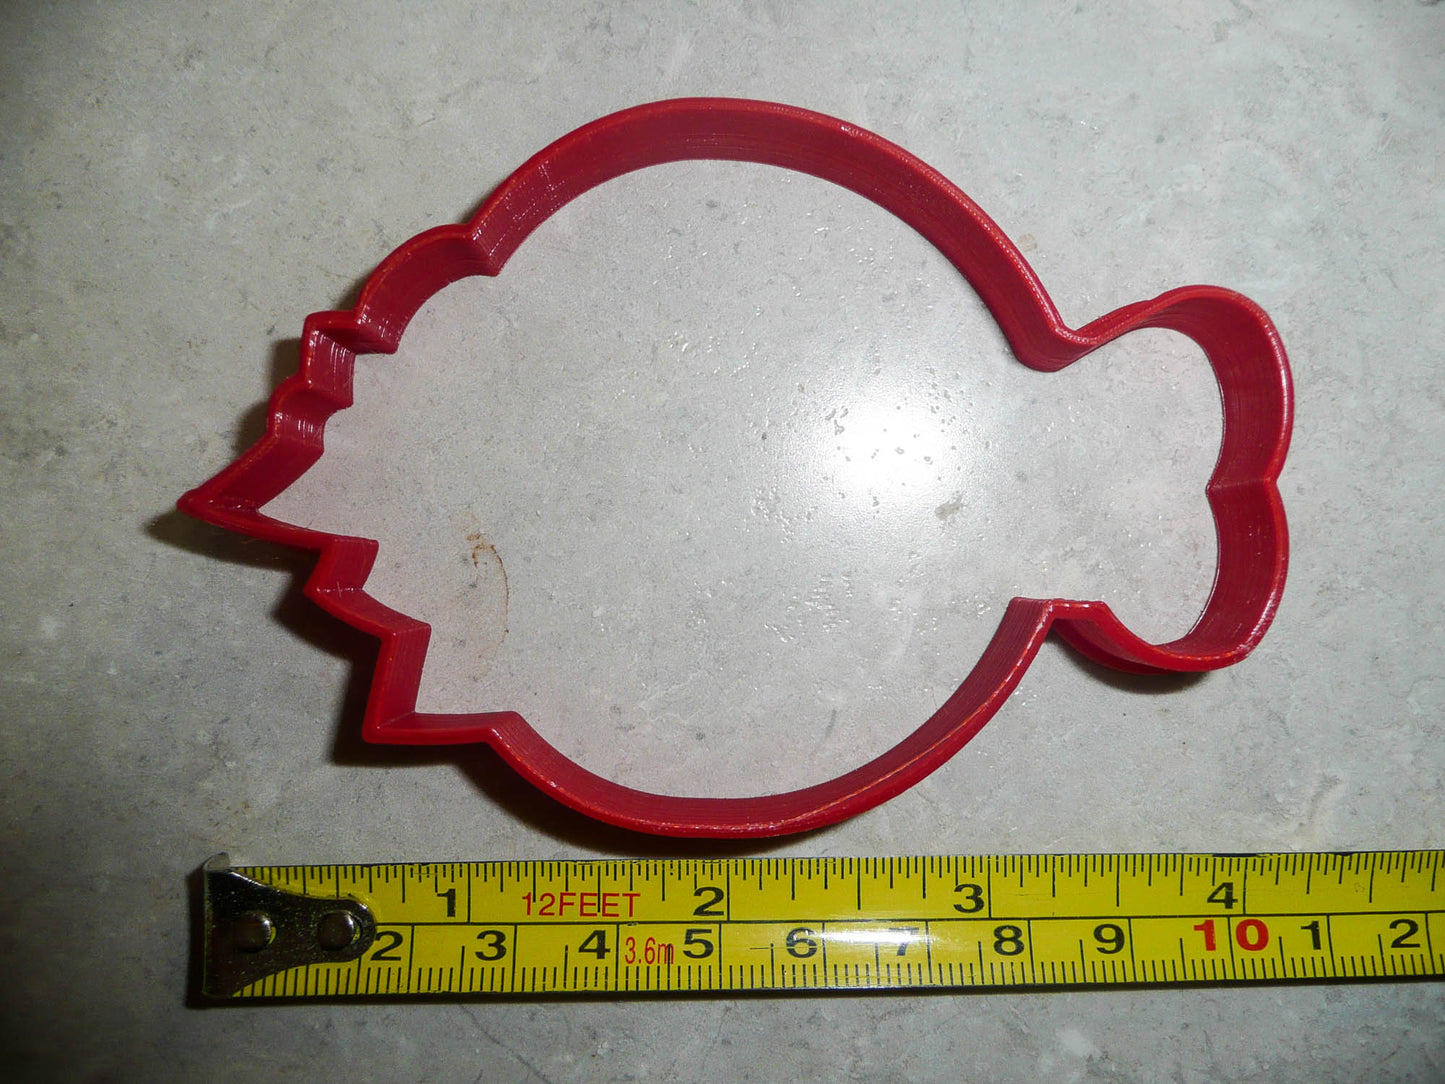 Onion Or Tomato Costume Outline Dress Up Halloween Cookie Cutter USA PR2987